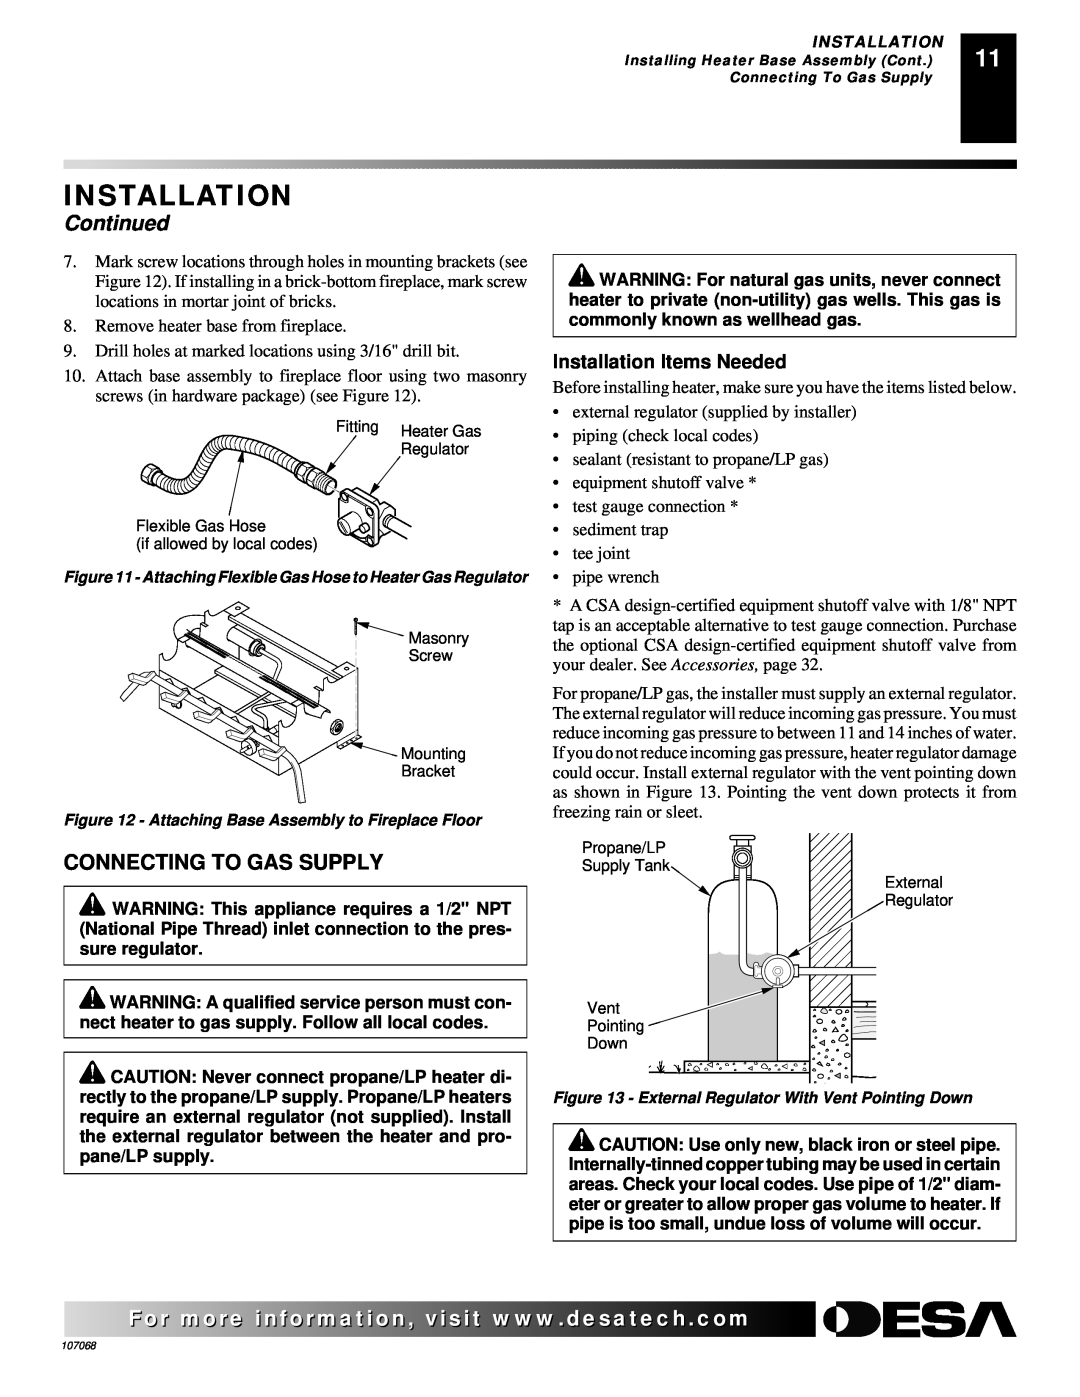 Desa CLD3018NA 24, CLD3924PTA, CLD3924NTA installation manual Connecting To Gas Supply, Installation, Continued 